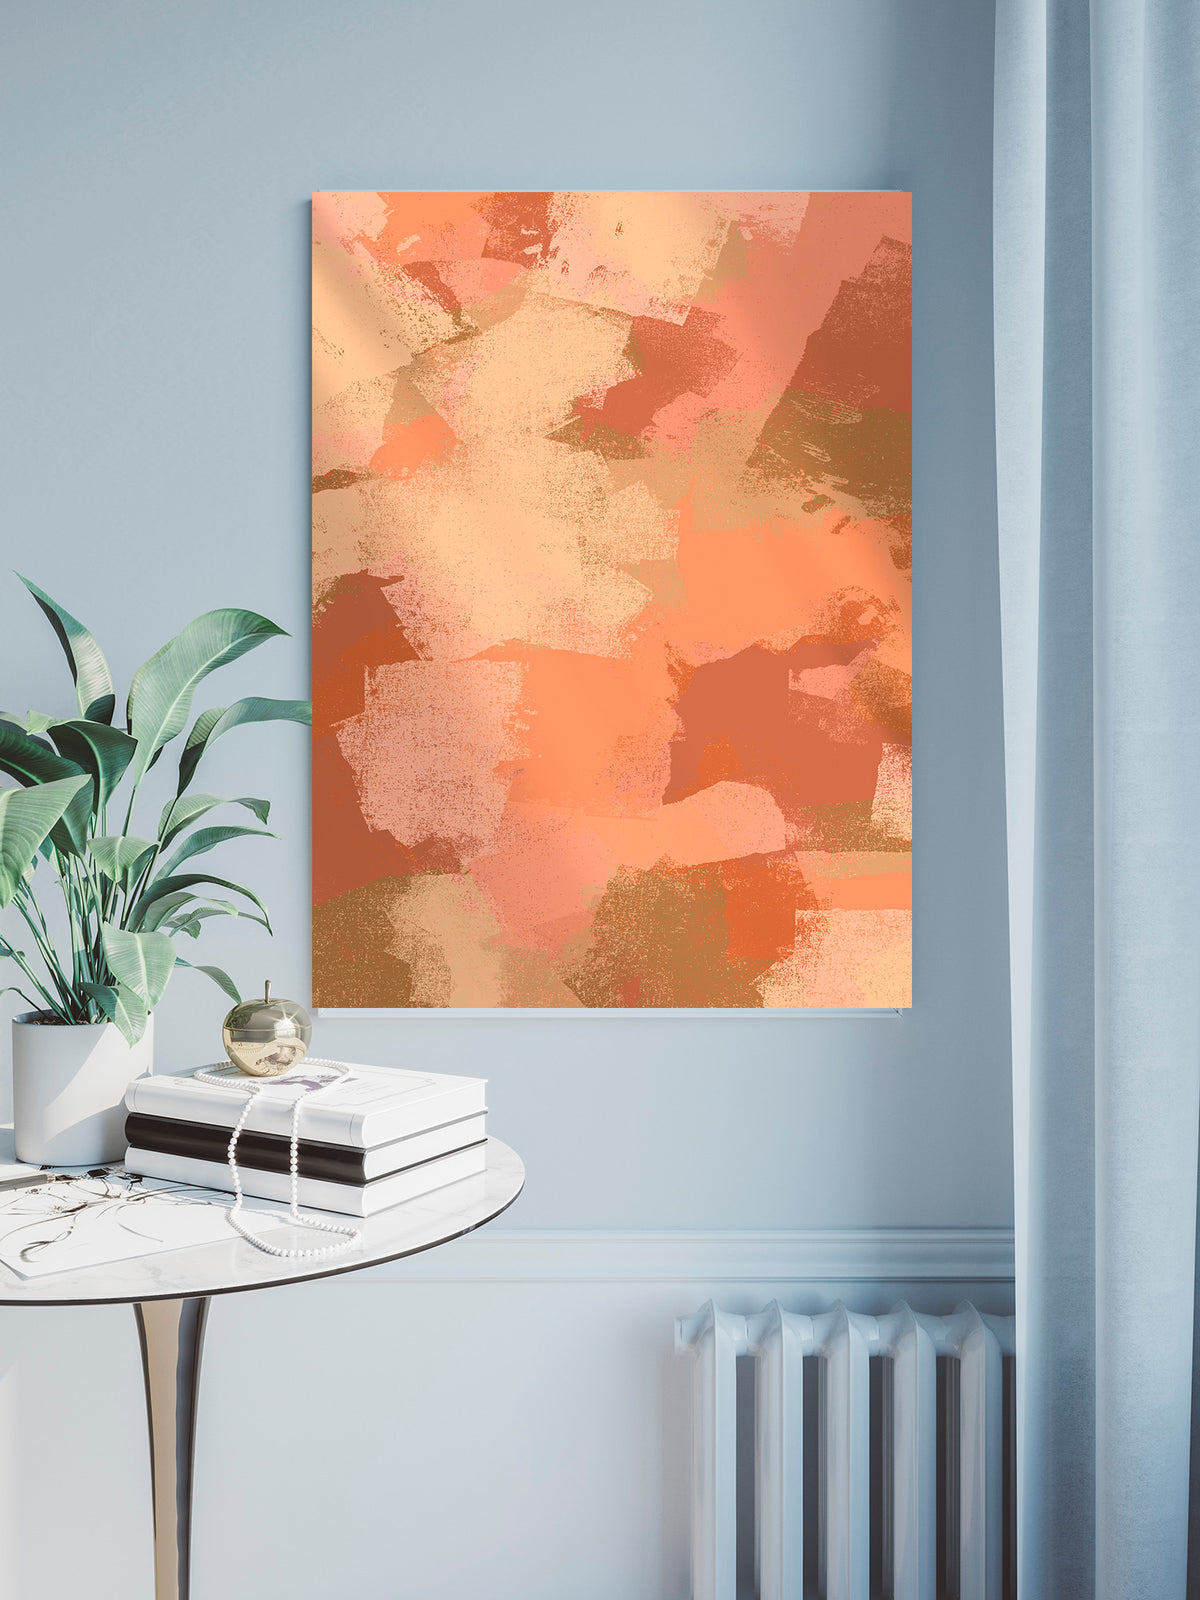 Introducing SHADES OF ORANGE - the 24"x36" wall poster with a kaleidoscope of color! This vibrant, self-adhesive and removable poster is available in your choice of substrate, so you can create the look that's perfect for your space. Get ready to be WOWed by the shades of orange!  Poster Material:   ReTac - (6 mil) printable, matte white phthalate-free polymeric PVC film w/sand texture  DS Caviar - is a thick (13 mil) vinyl, weighing 15oz with a textured surface.   NOTE: frame not included